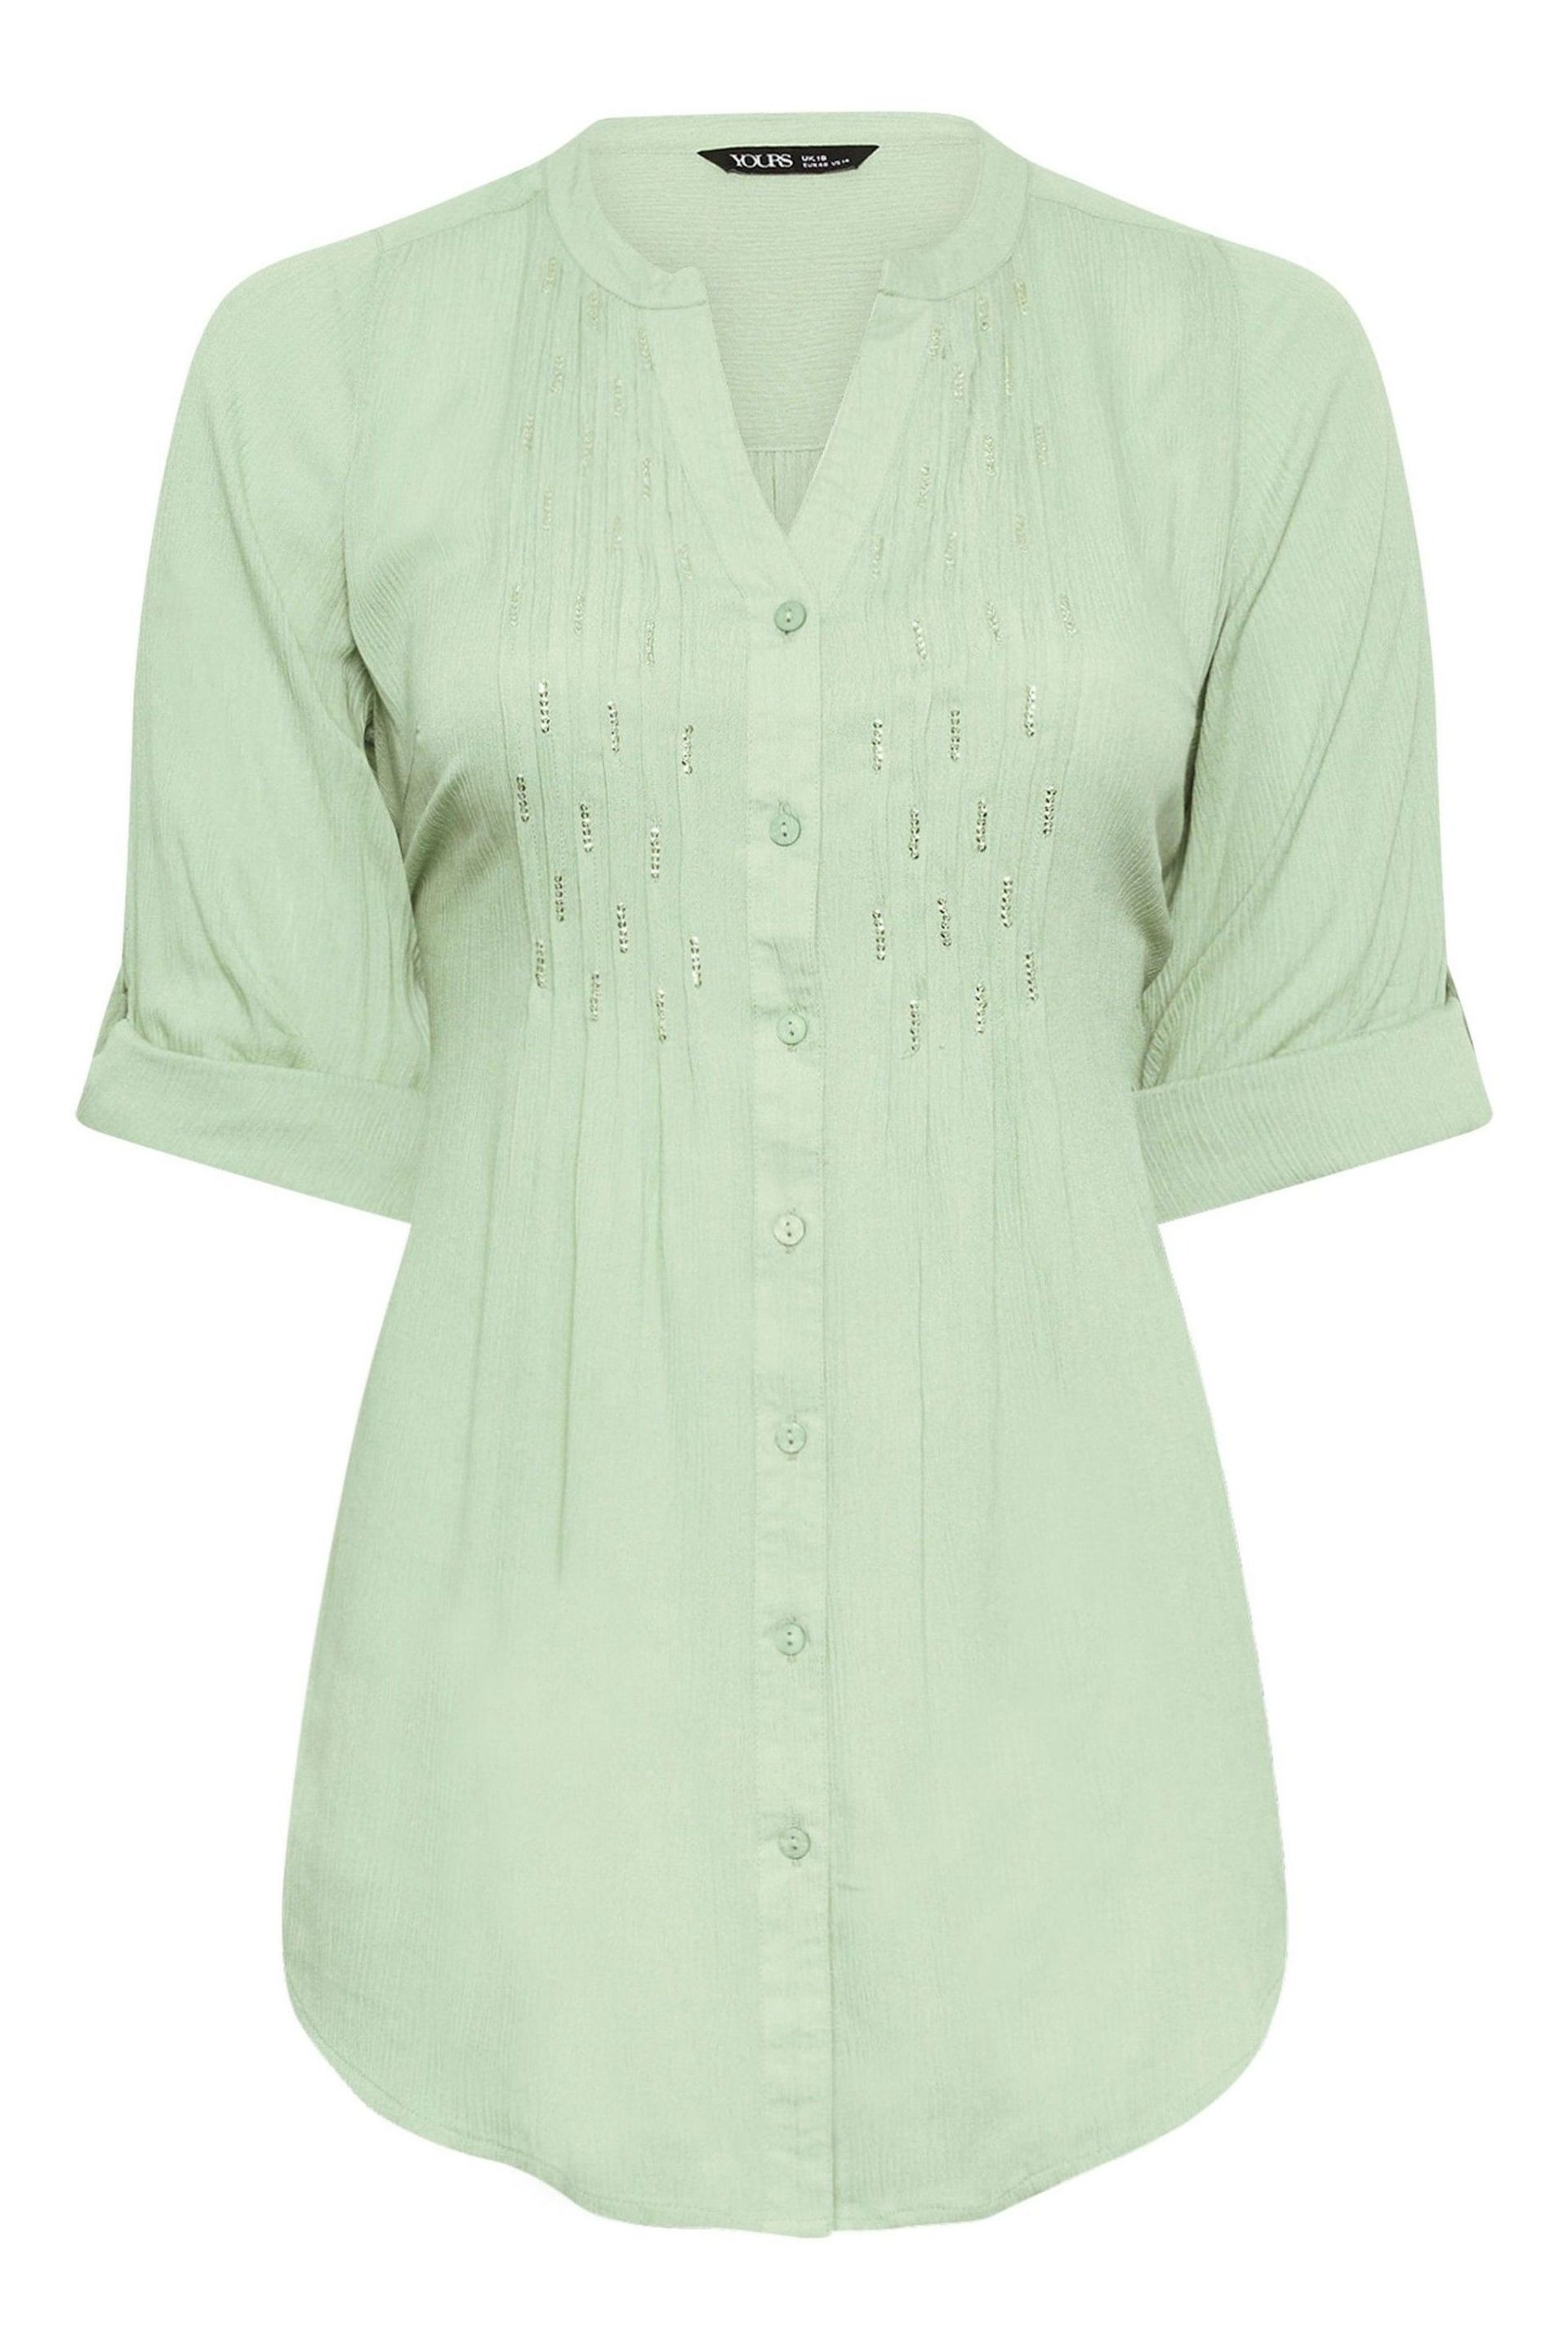 Yours Curve Green Pintuck Shirt - Image 5 of 5